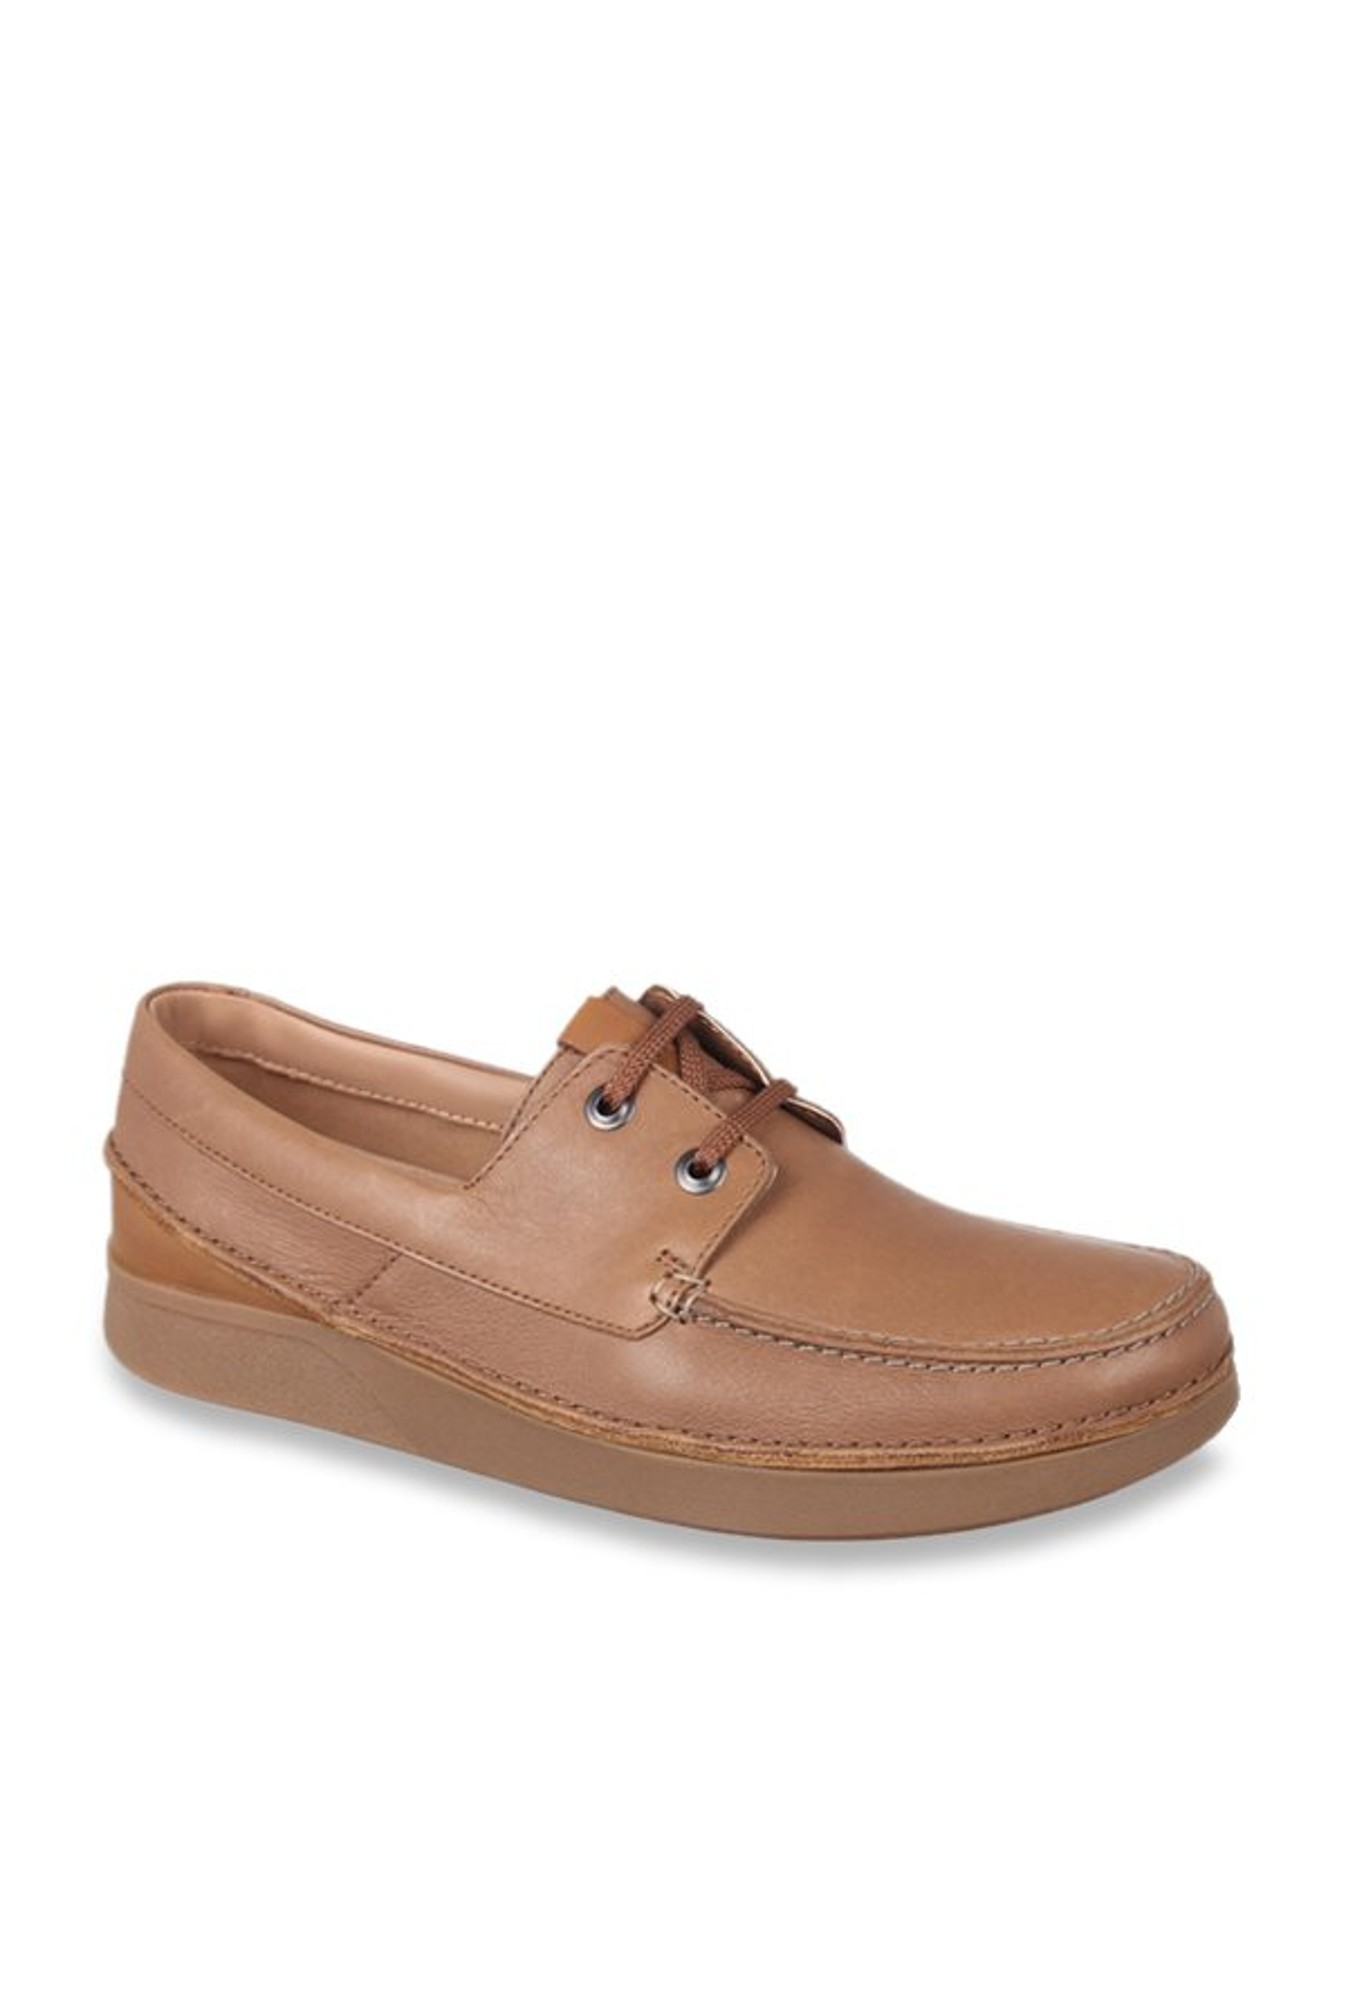 Clarks Oakland Sun Brown Casual Shoes 